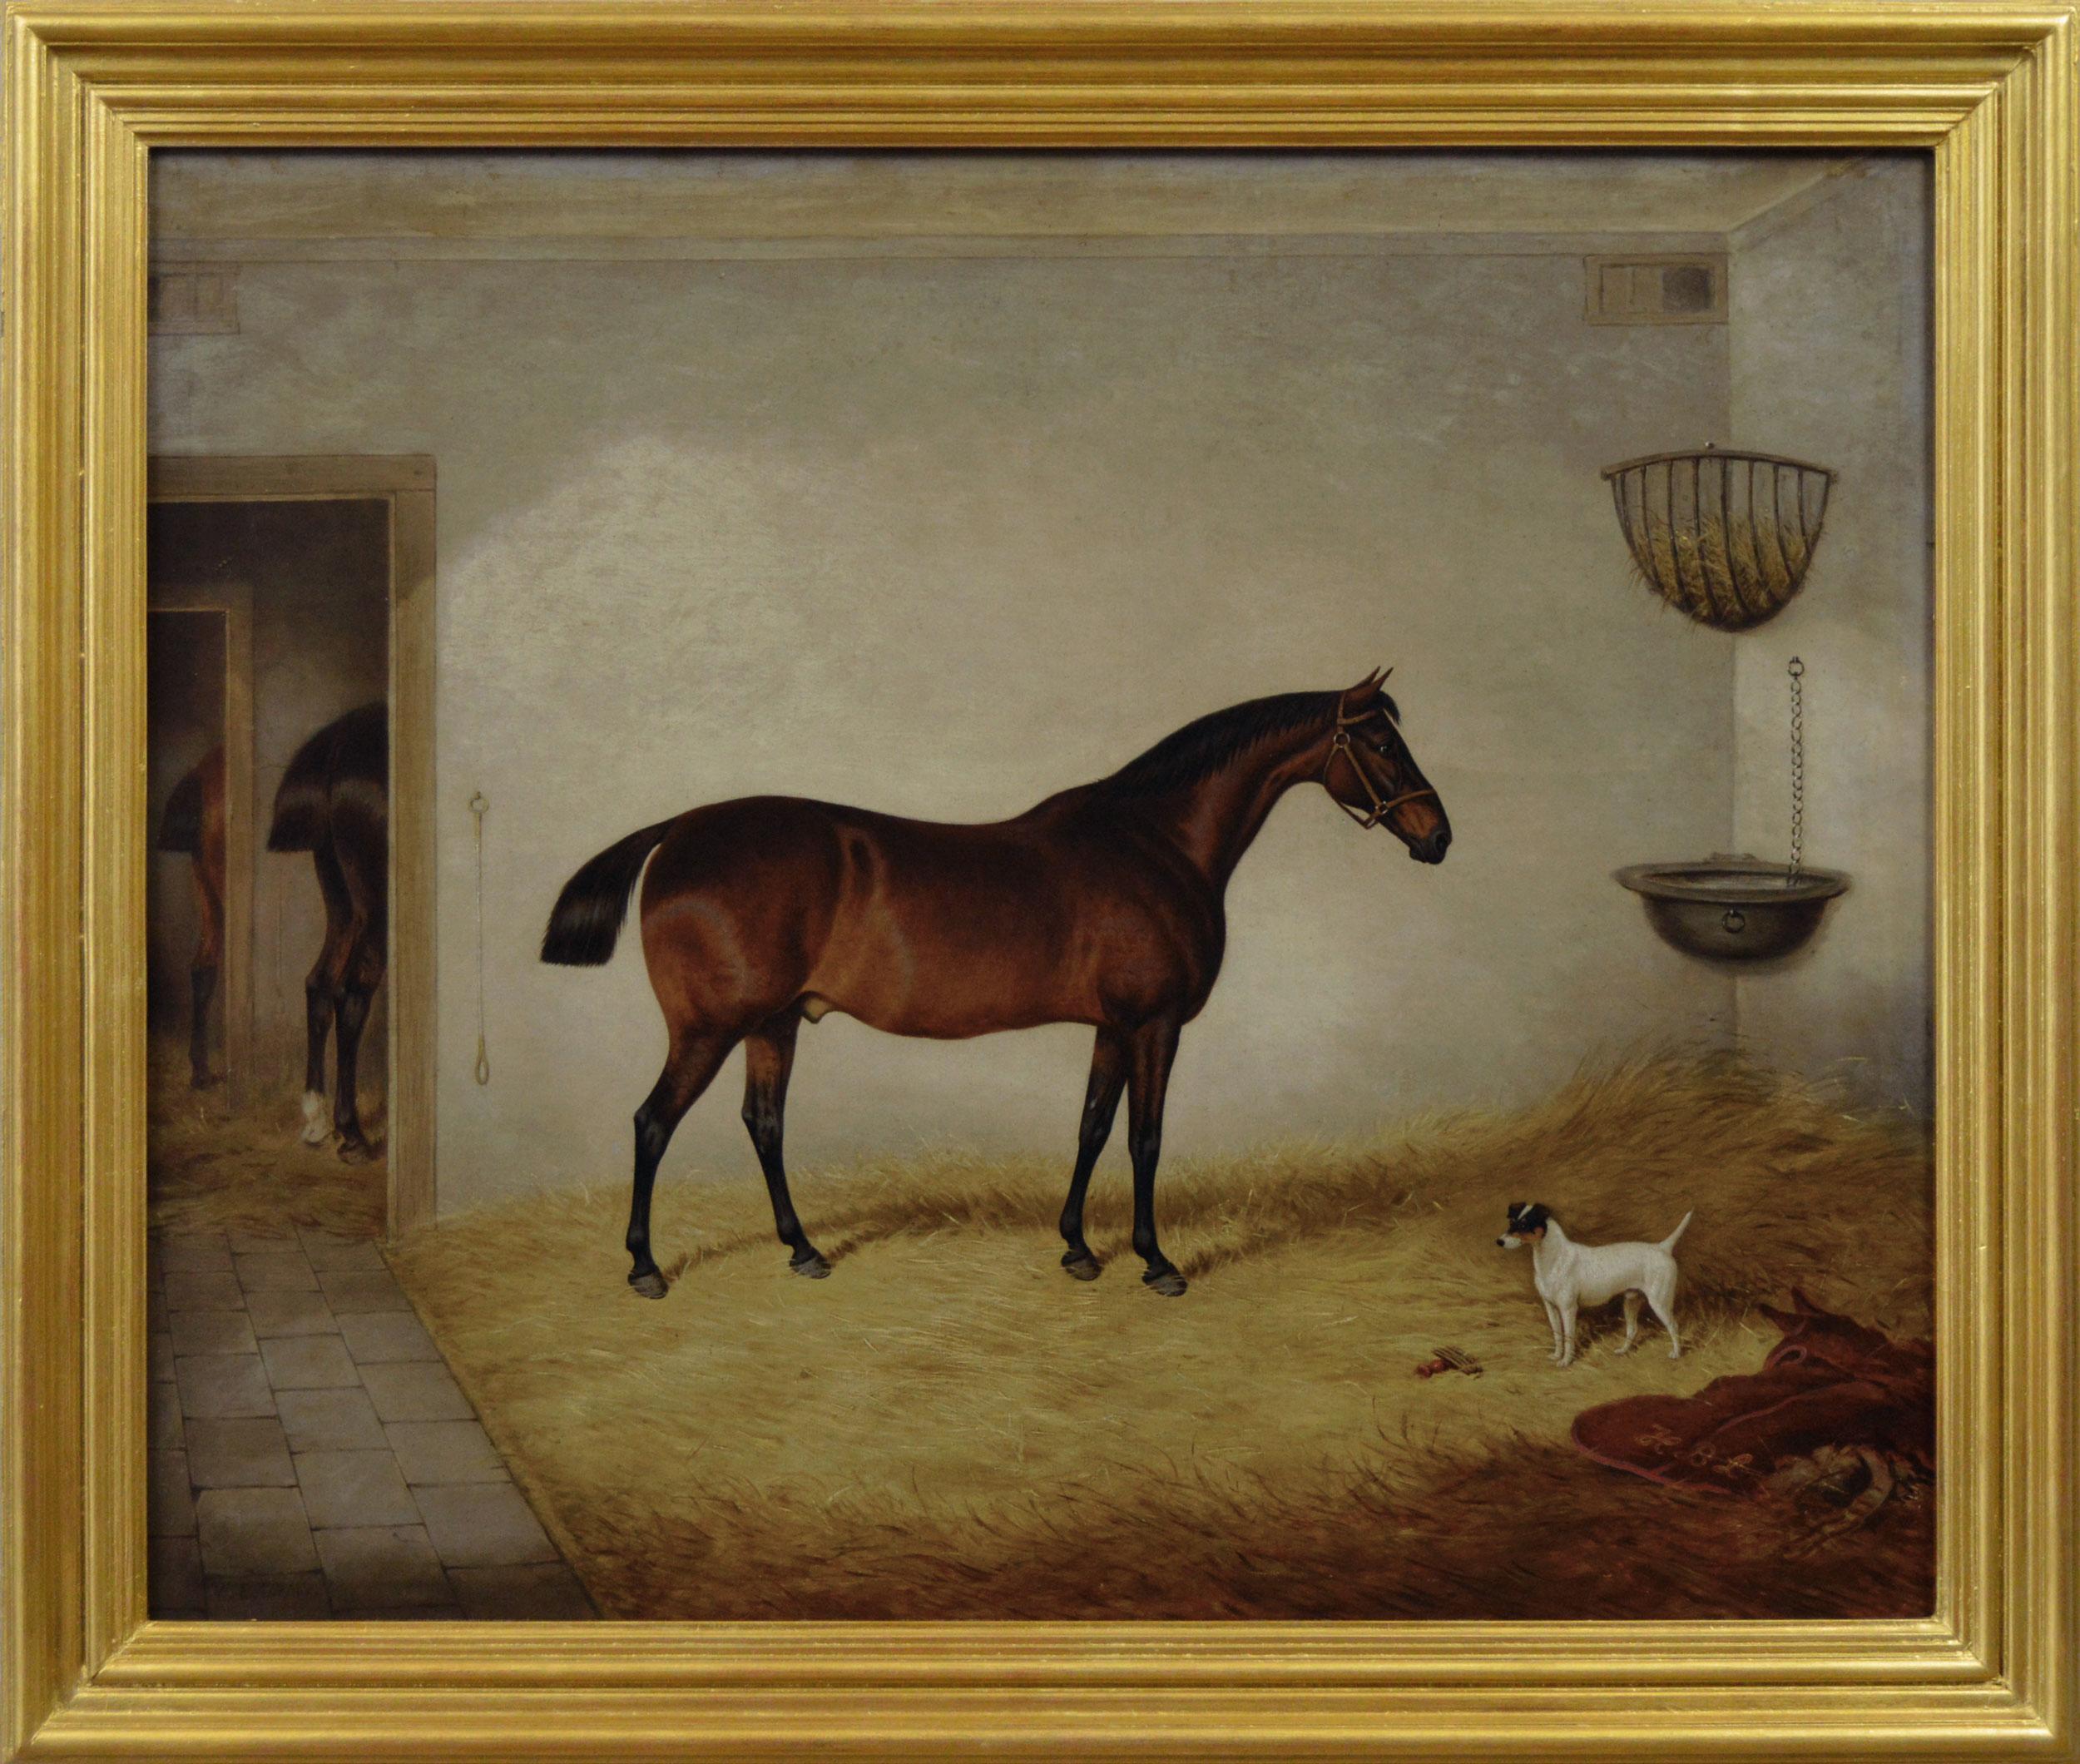 19th Century sporting horse portrait oil painting of a bay horse & terrier